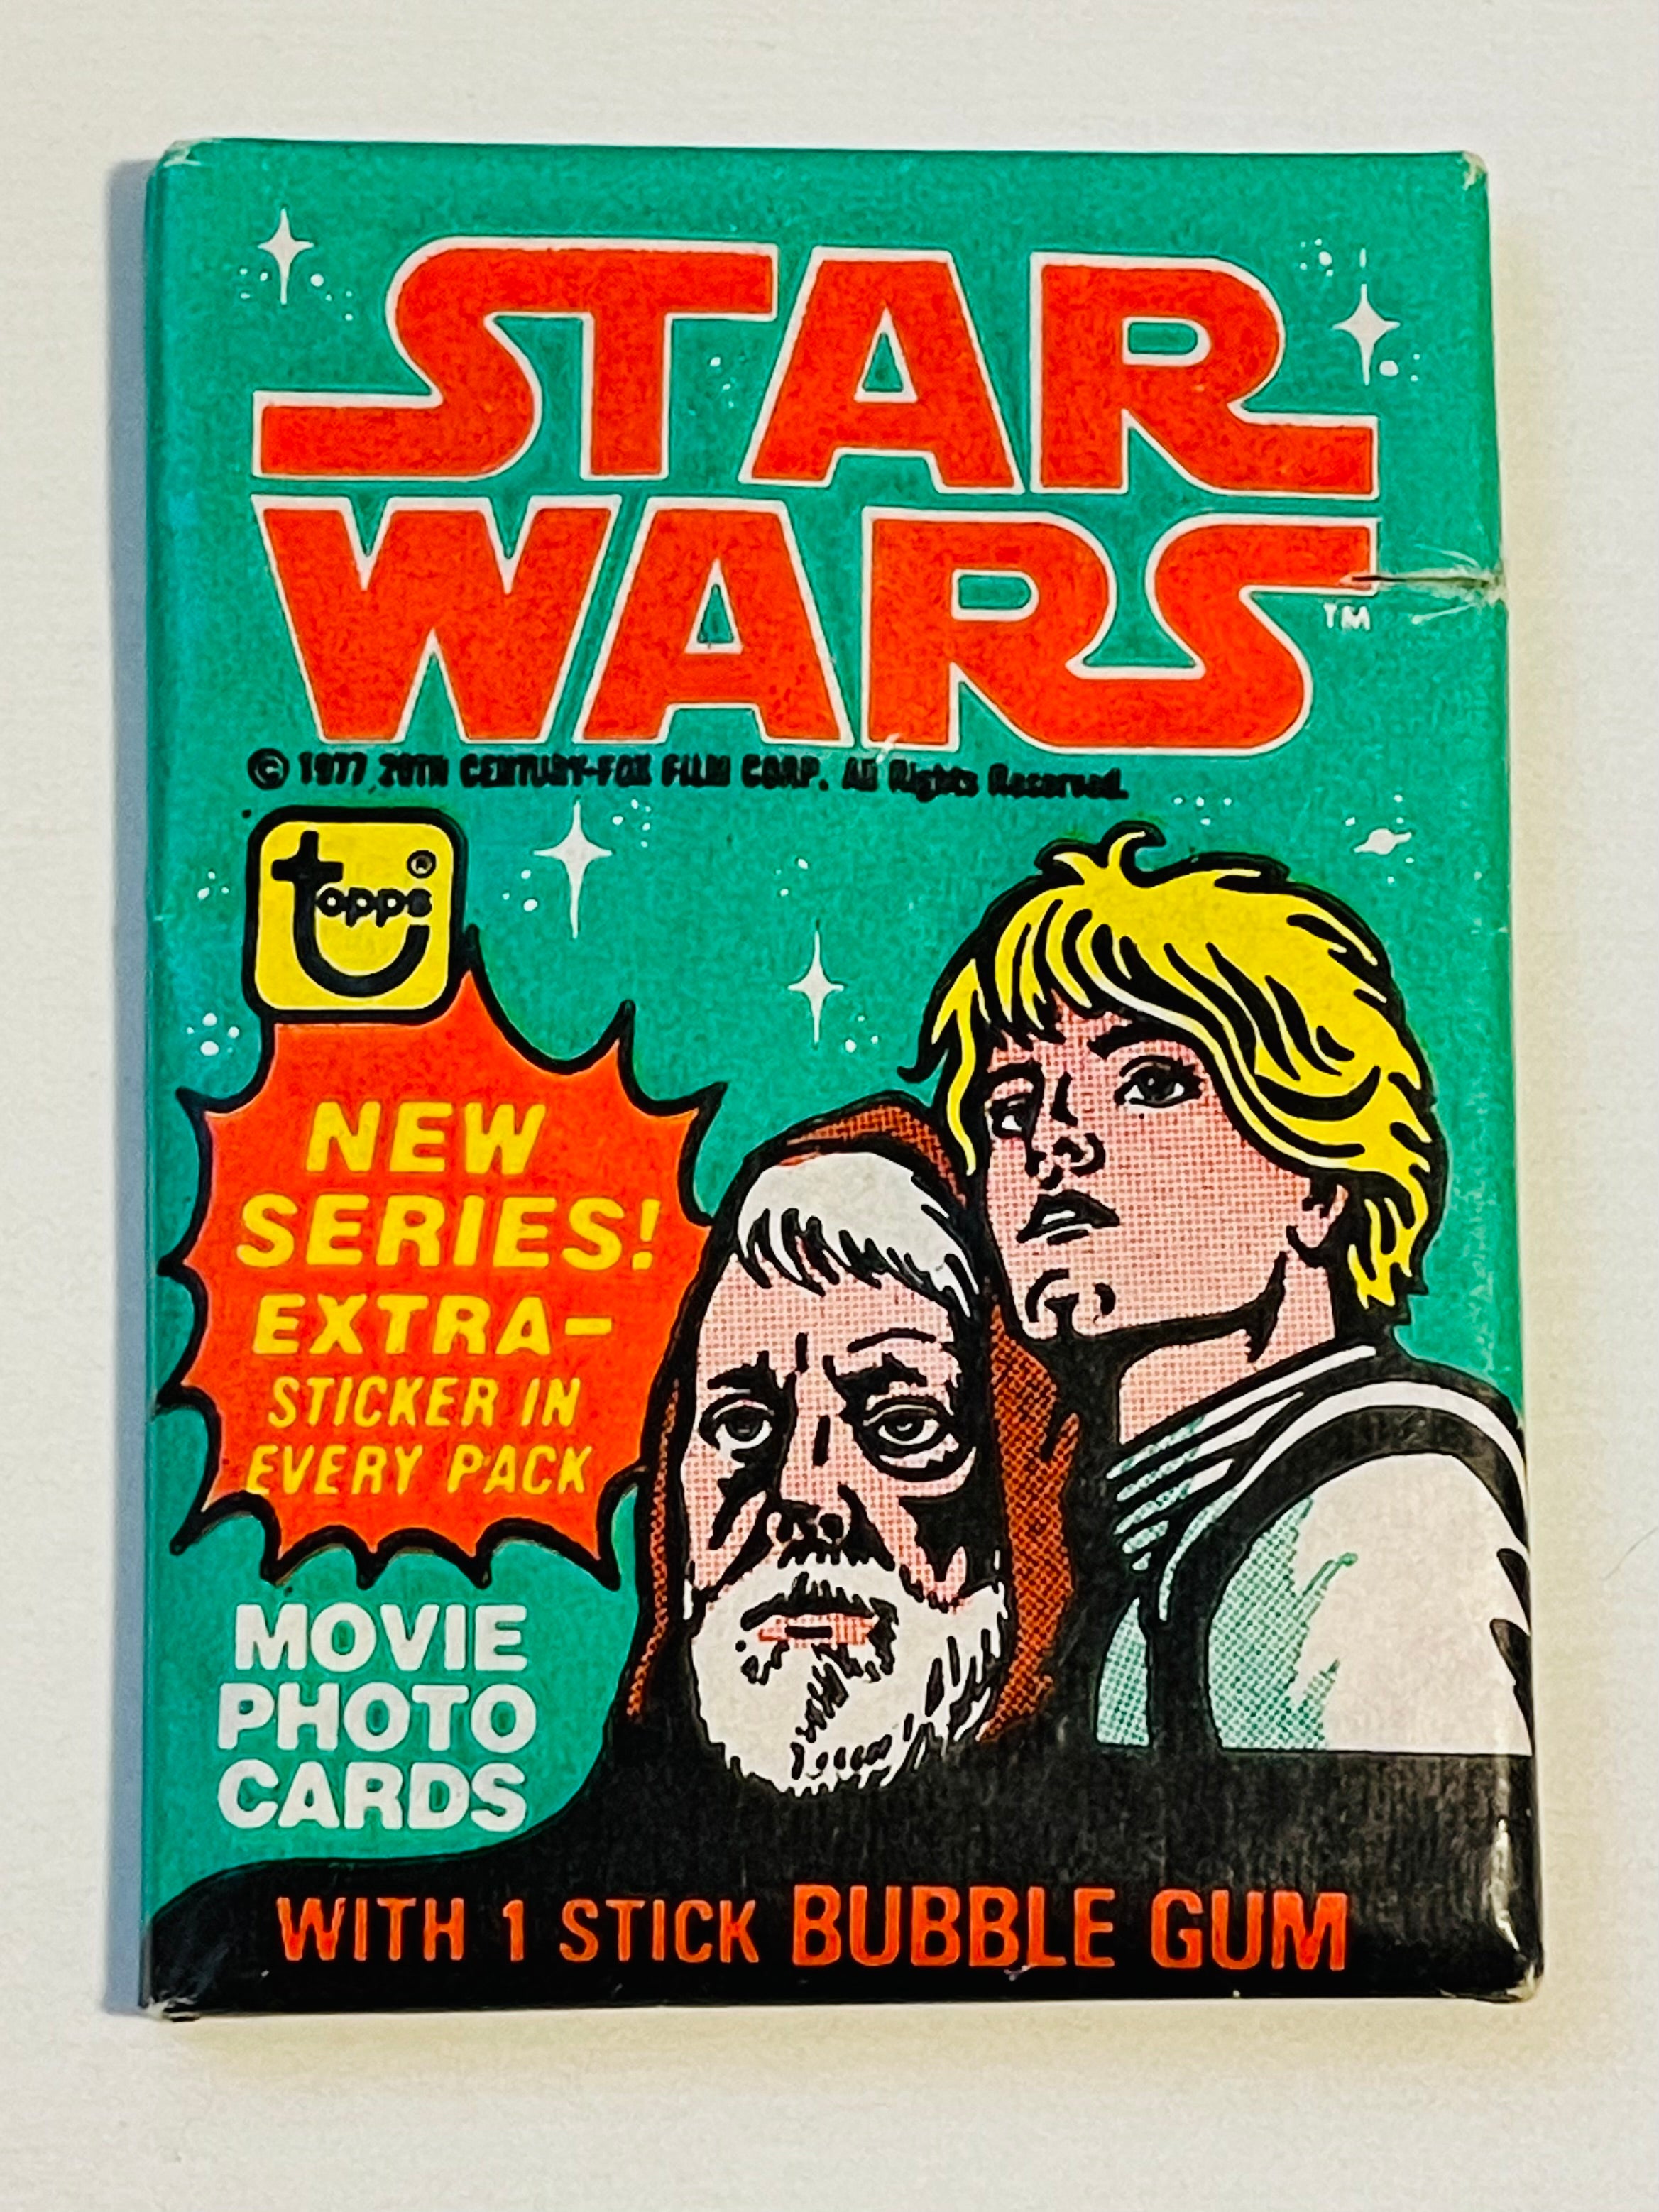 Star Wars series 4 rare cards sealed pack 1977